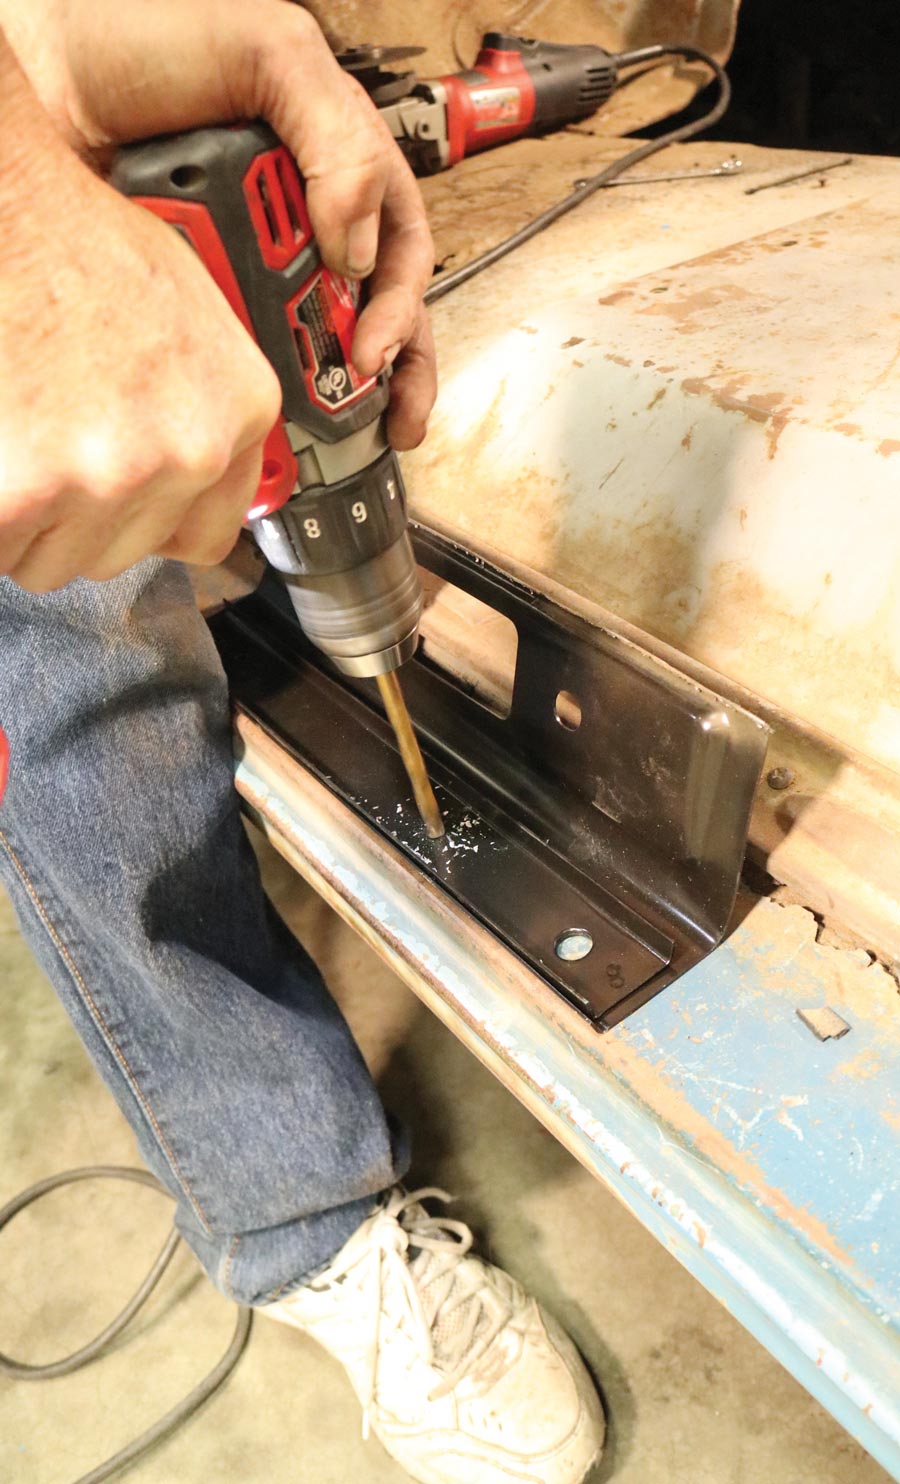 Drilling into the OE inner dash brace